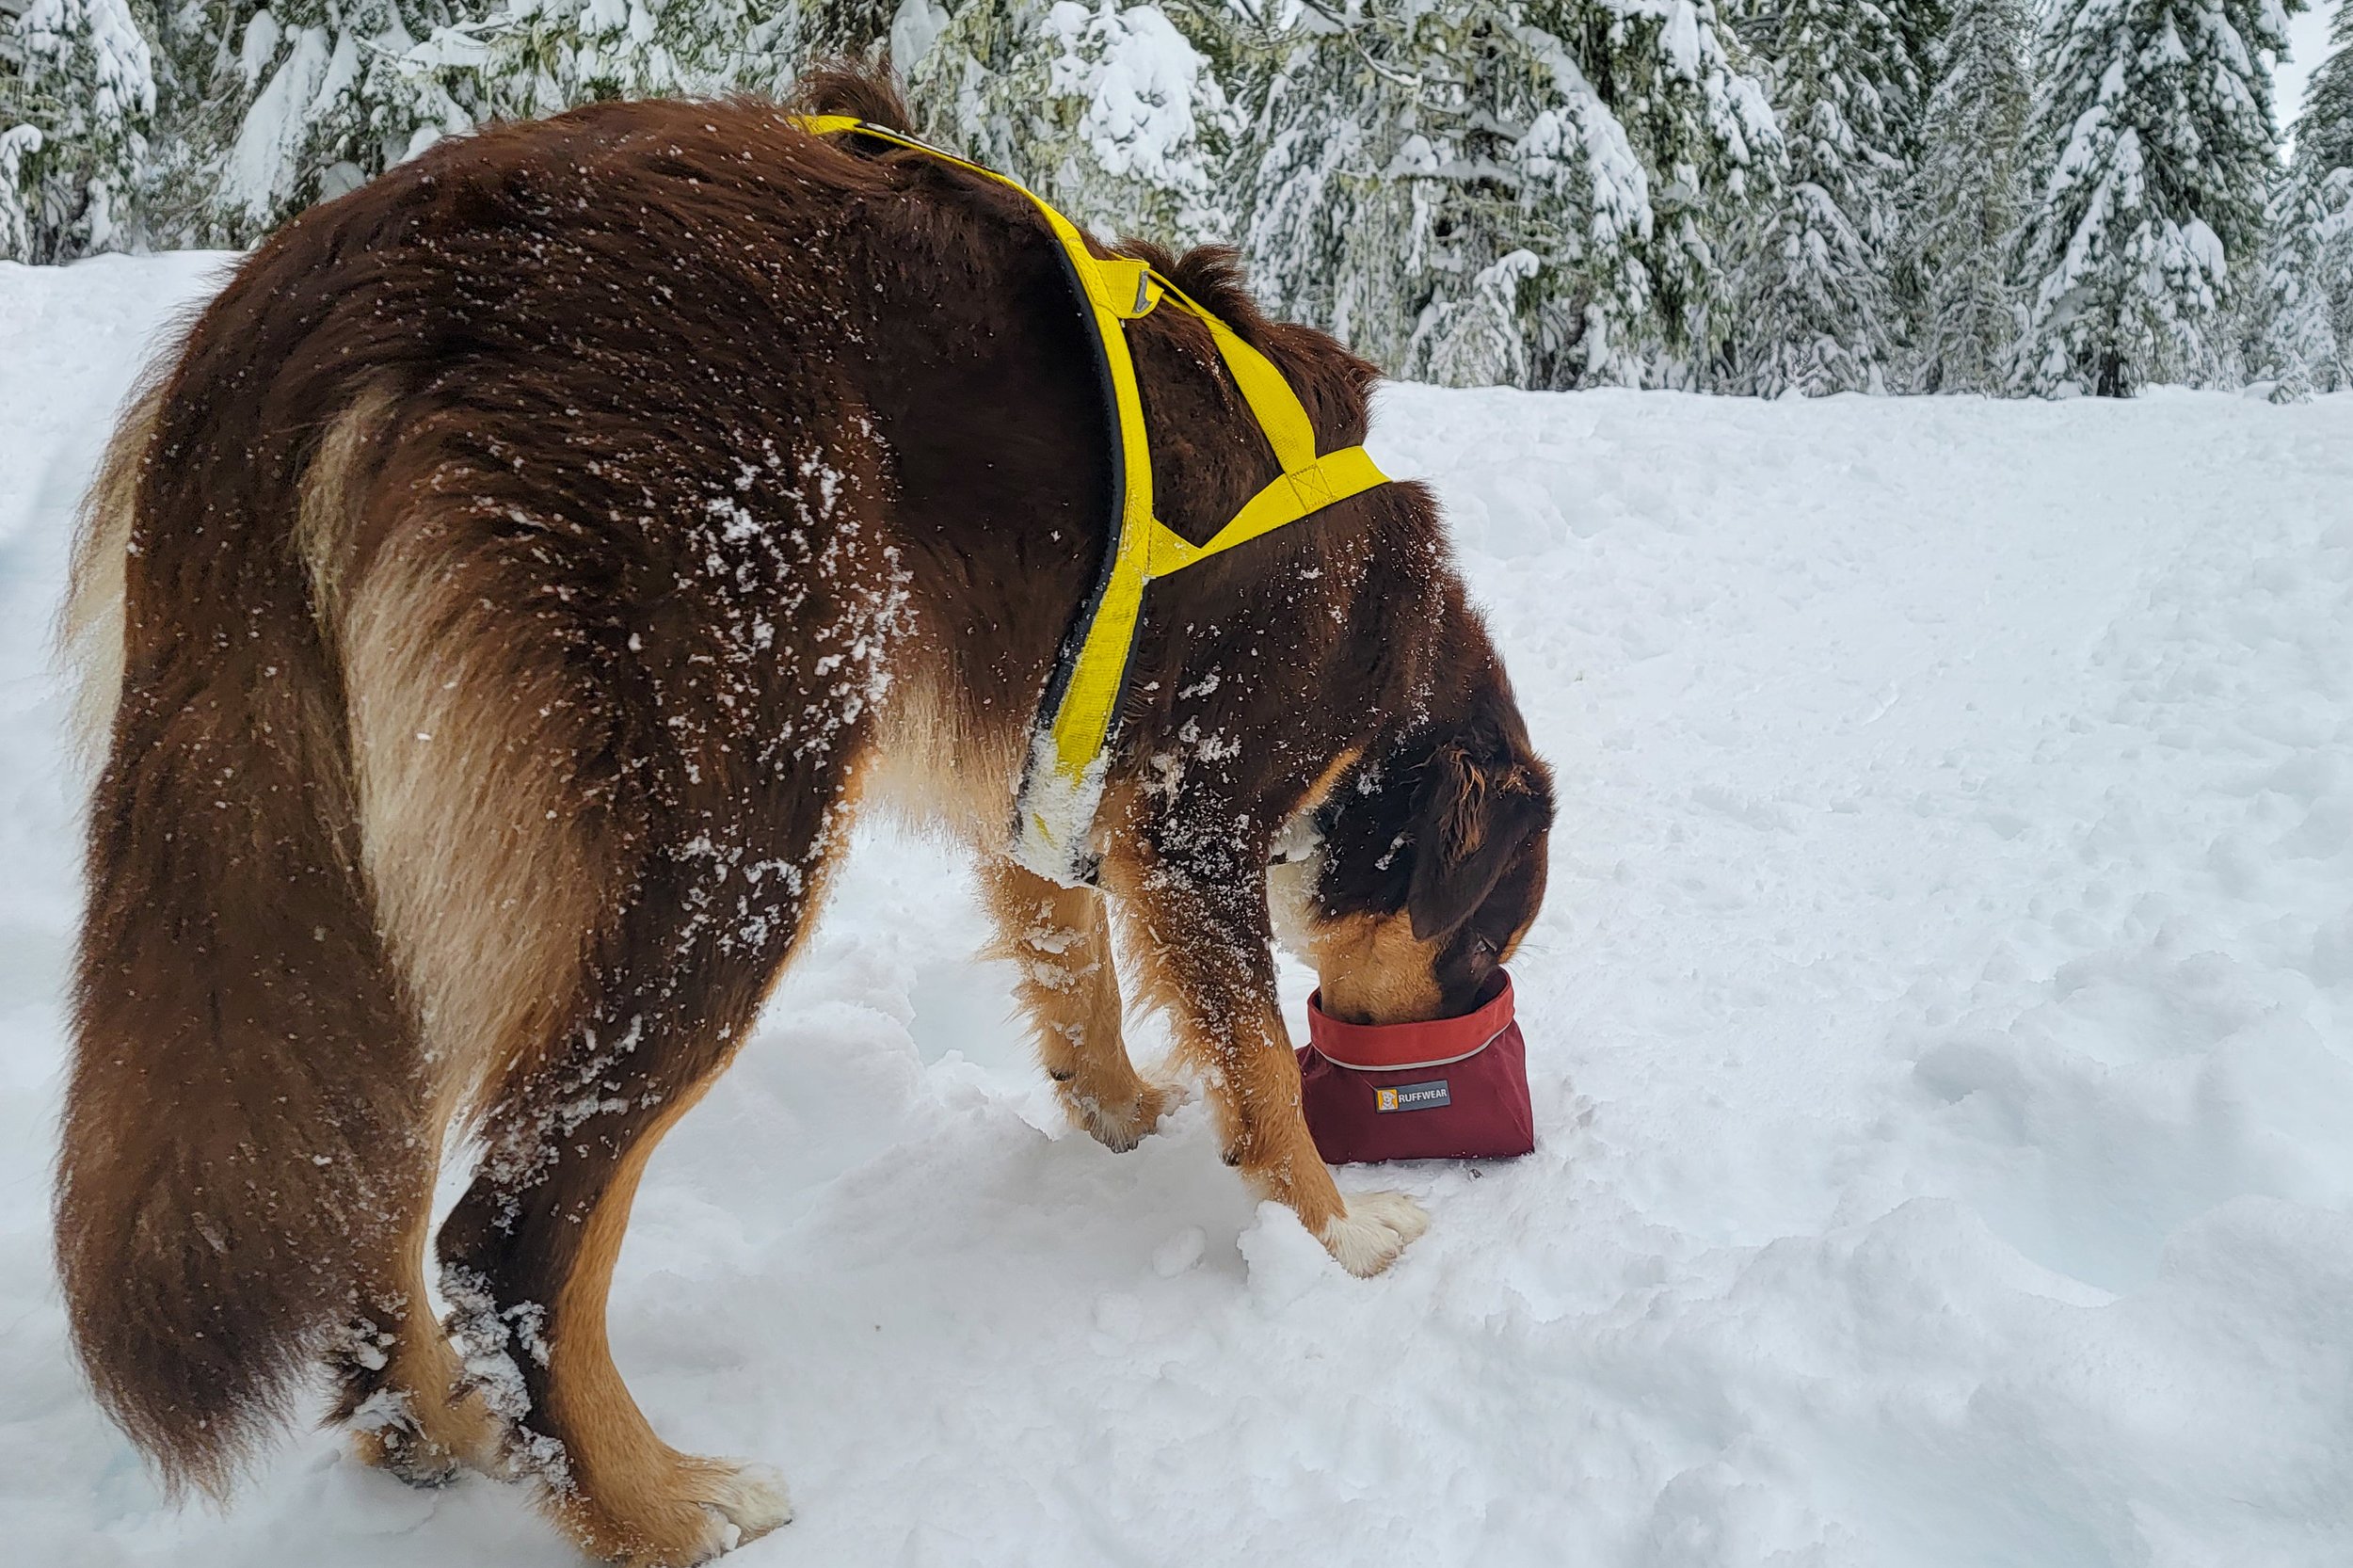 A dog eating from the Ruffwear Quencher Dog Bowl in the snow